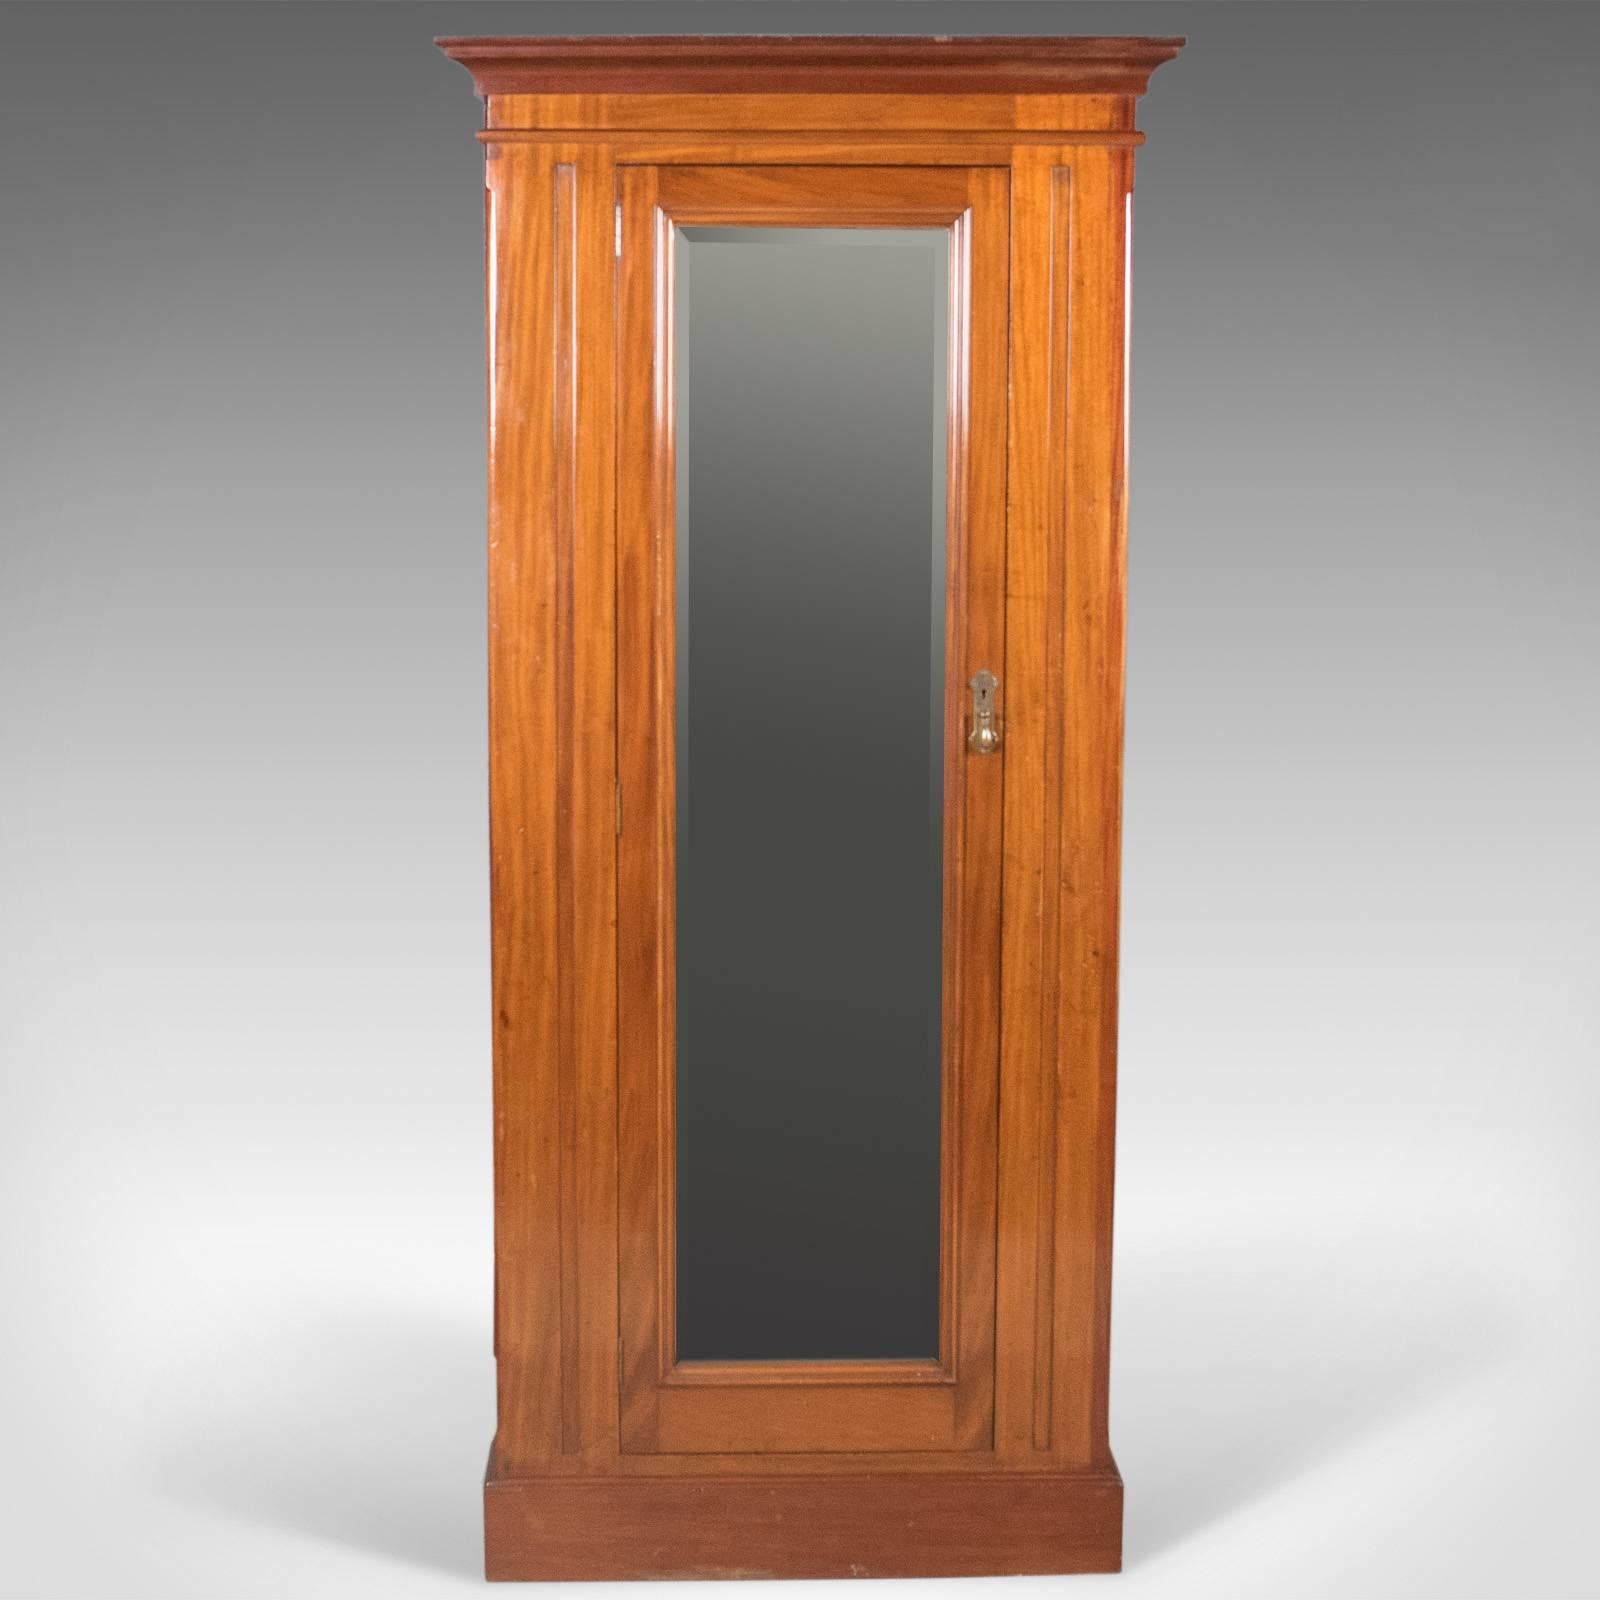 This is an Victorian antique corner wardrobe in mahogany. An English cabinet dating to circa 1880.

Quality craftsmanship in mahogany displaying honey tones
Good, consistent color and grain interest in the wax polished finish
Upper frieze